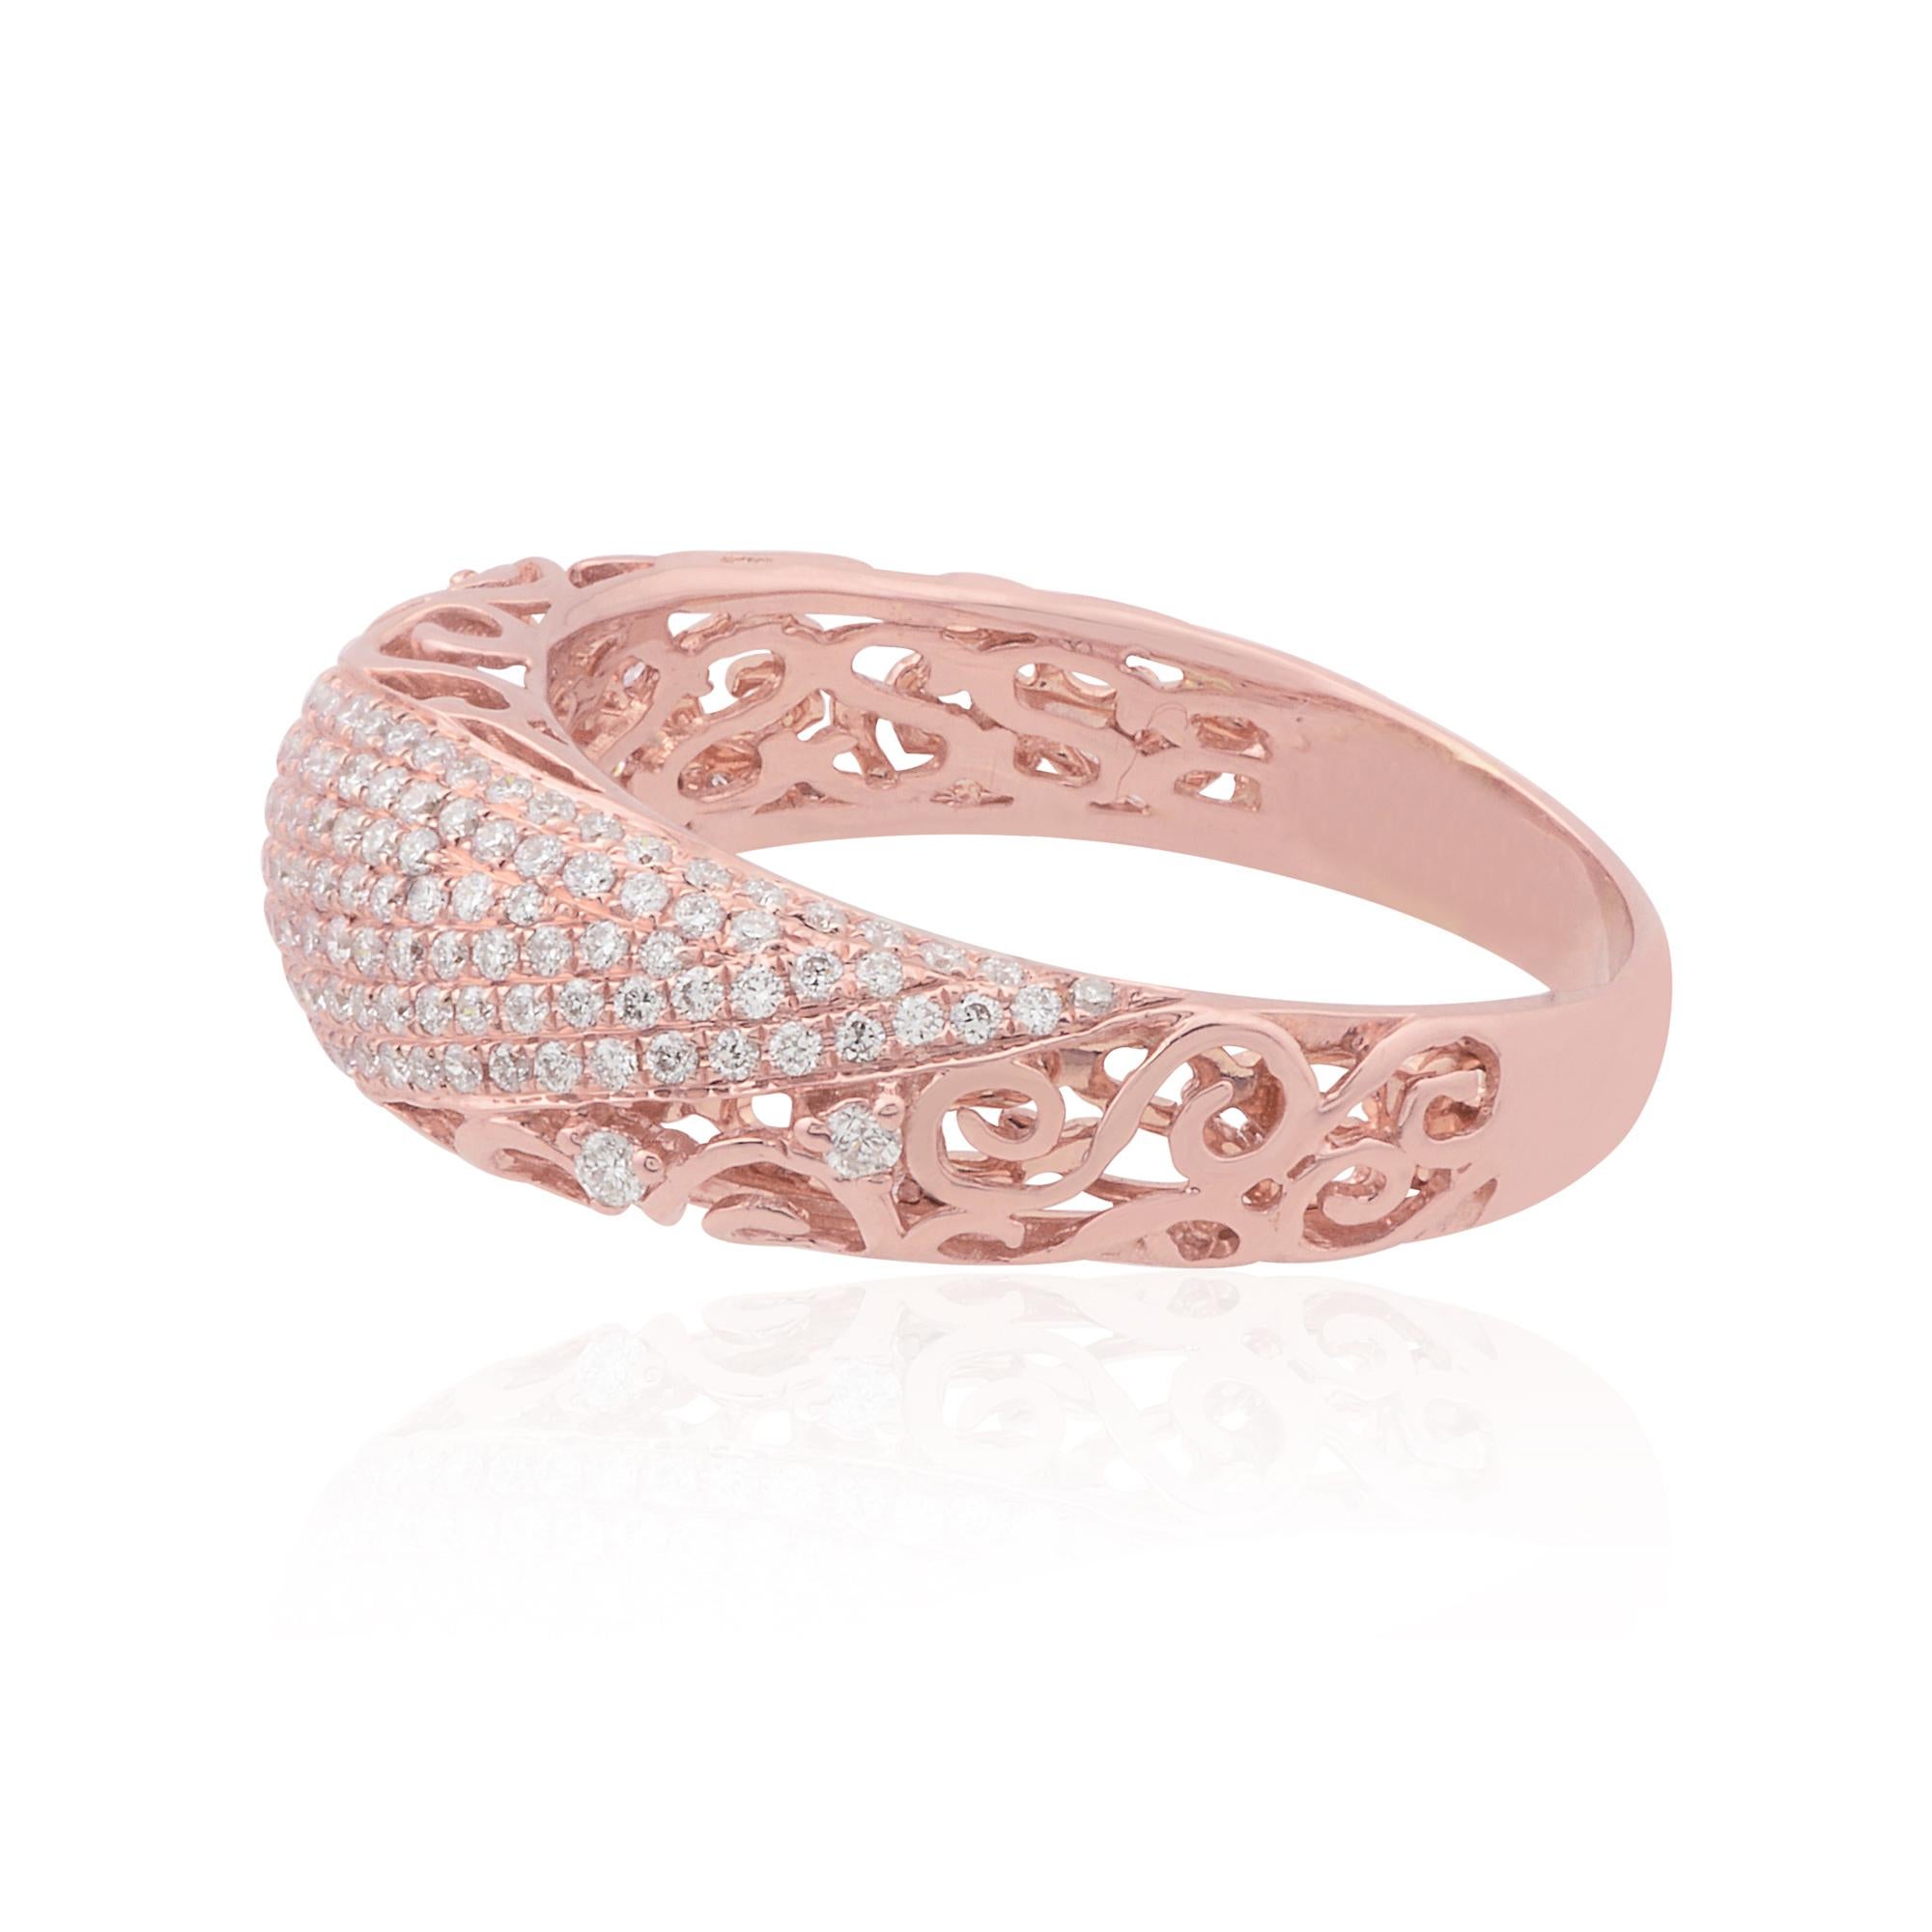 Women's 0.70 Carat Diamond Pave Filigree Design Ring Solid 14k Rose Gold Fine Jewelry For Sale